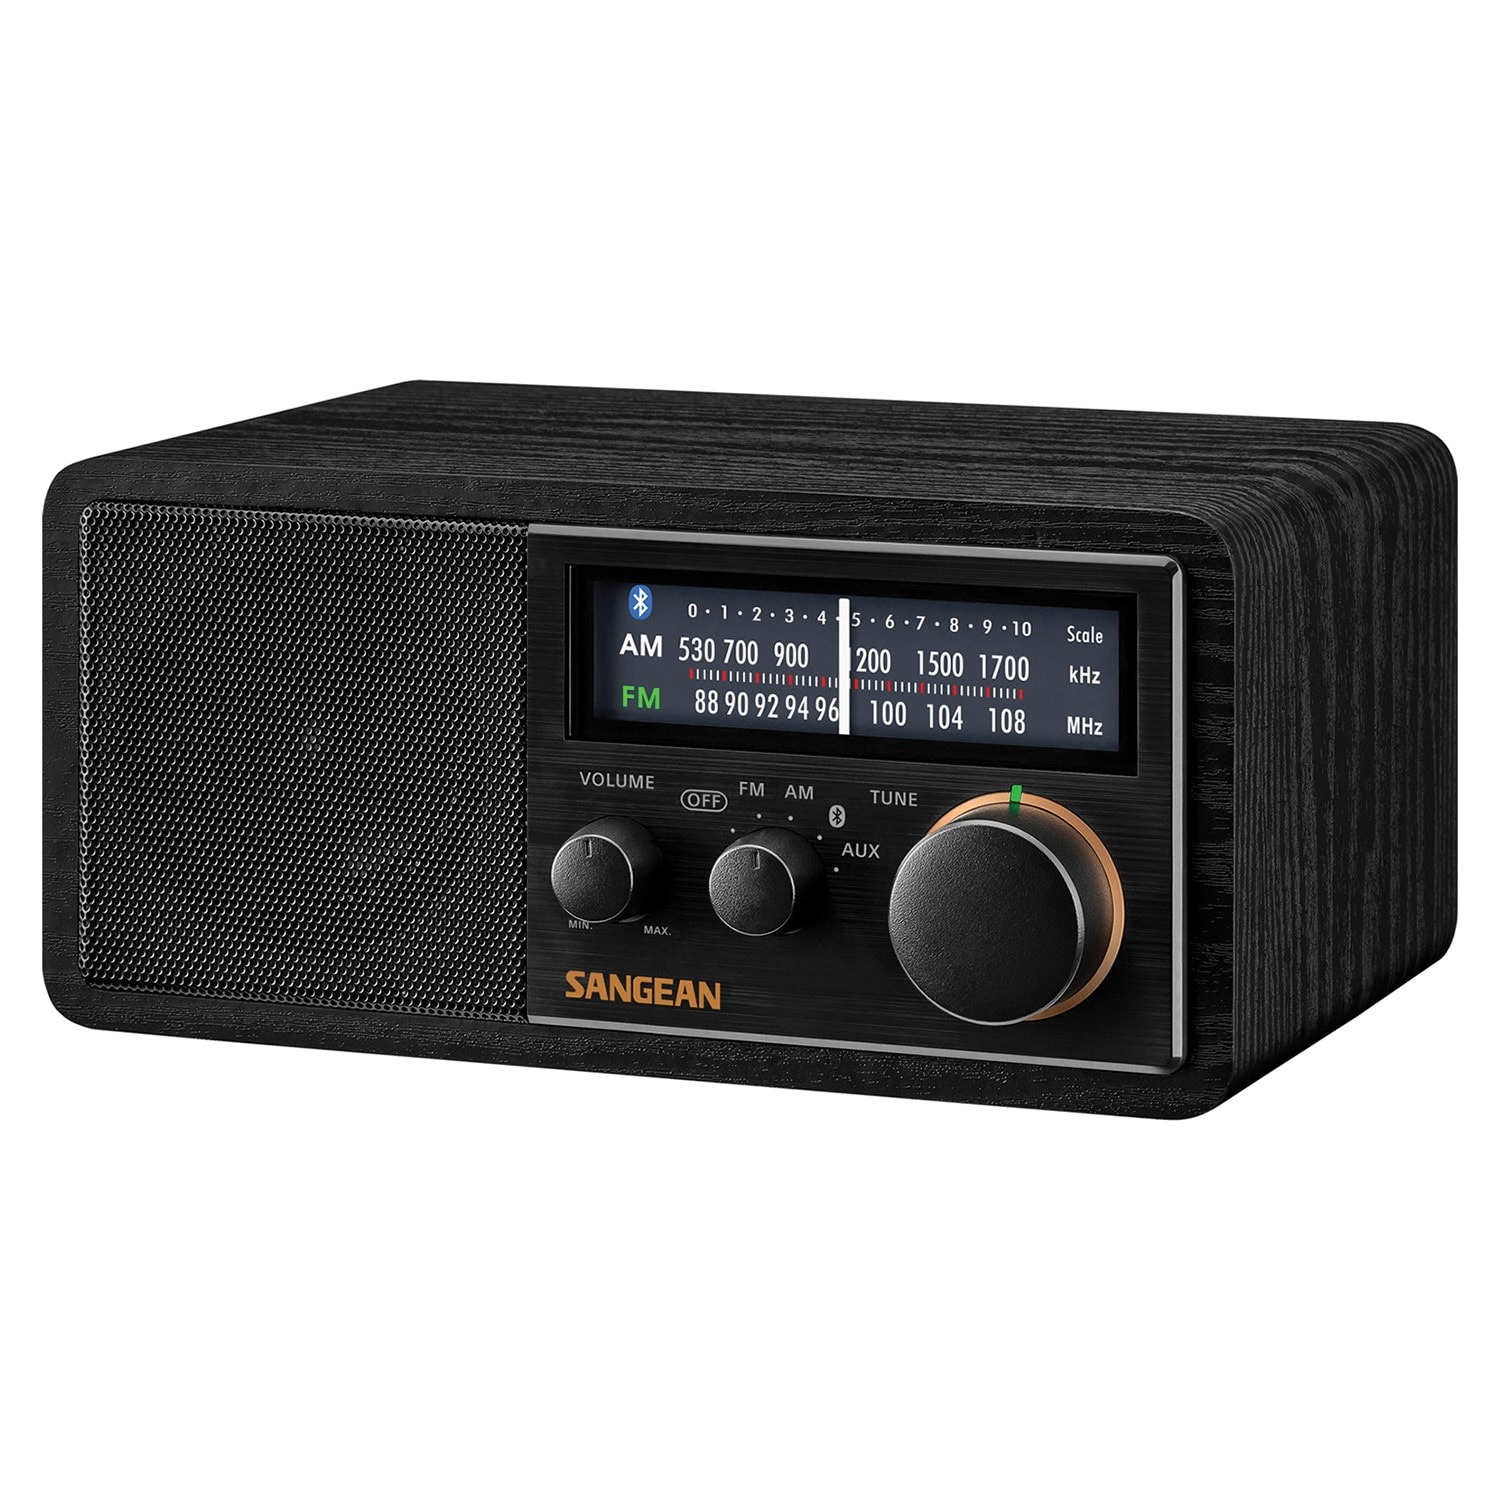 Sangean Black AM/FM Radio with Bluetooth, USB Port, and Auxiliary Ports -  Universal Compatibility - Analog Display - Plug-in Power Source